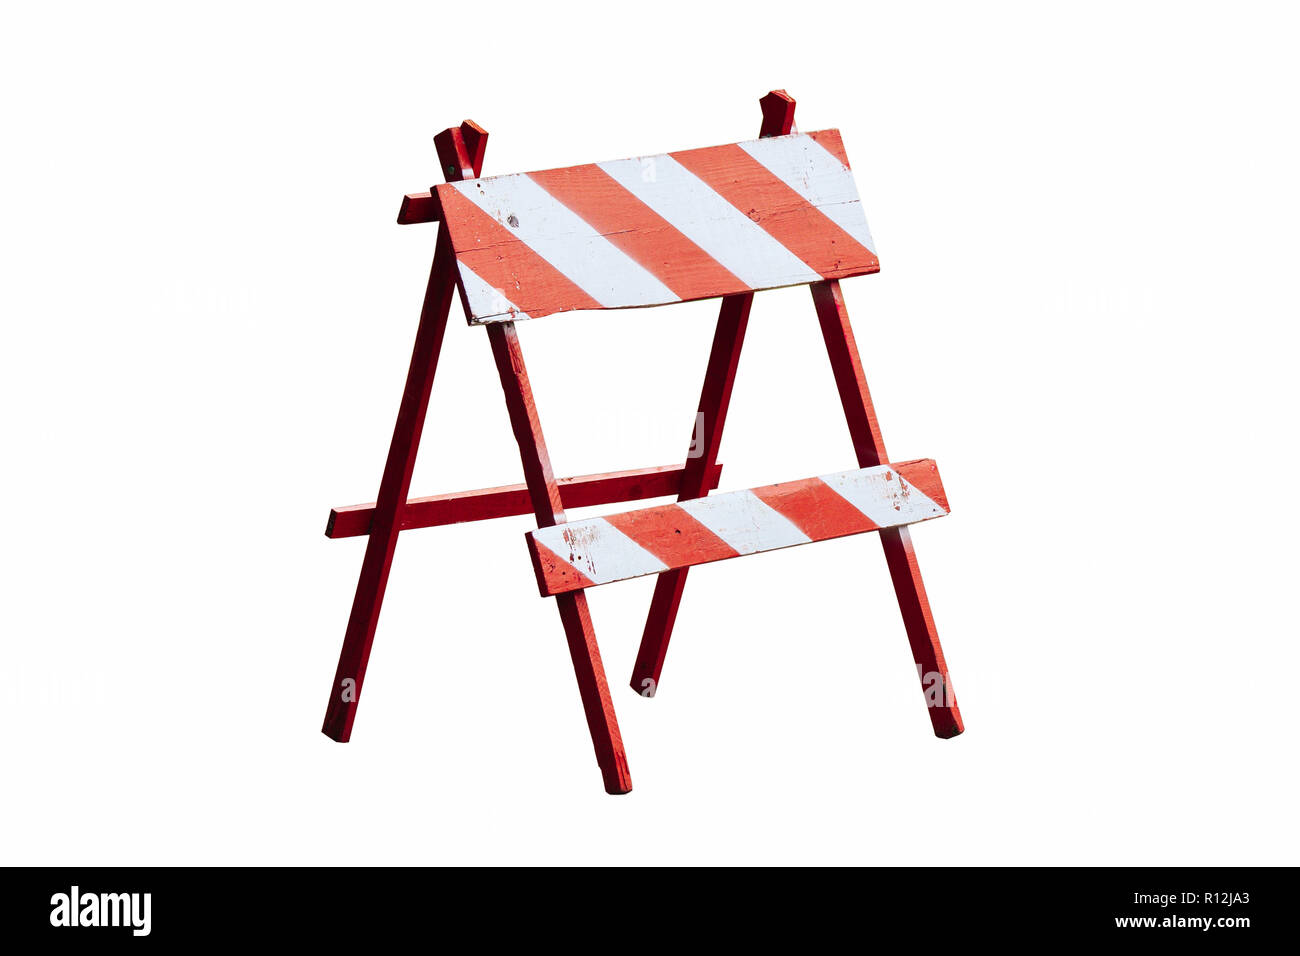 Red and white painted vintage wooden road block or barrier as wood frame barricade with four legs isolated on a seamless white background. Stock Photo